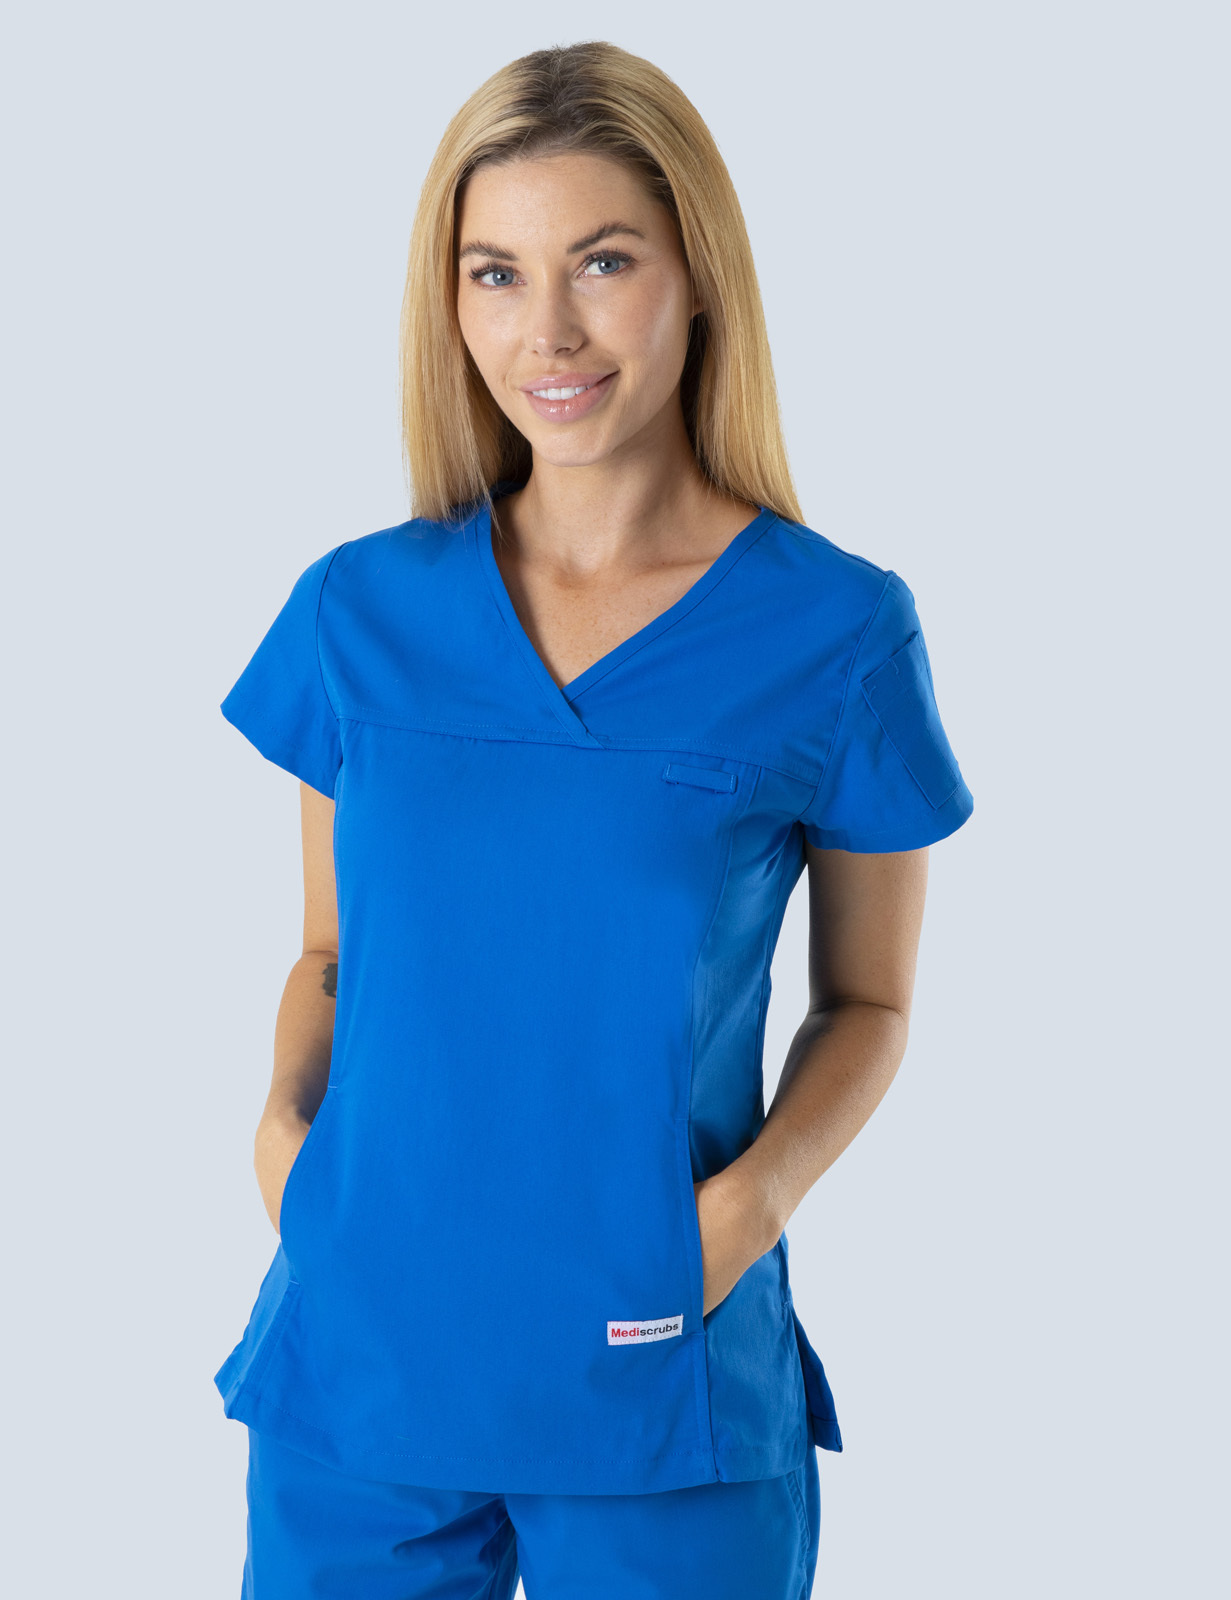 Women's Fit Solid Scrub Top - Royal - 3X Large